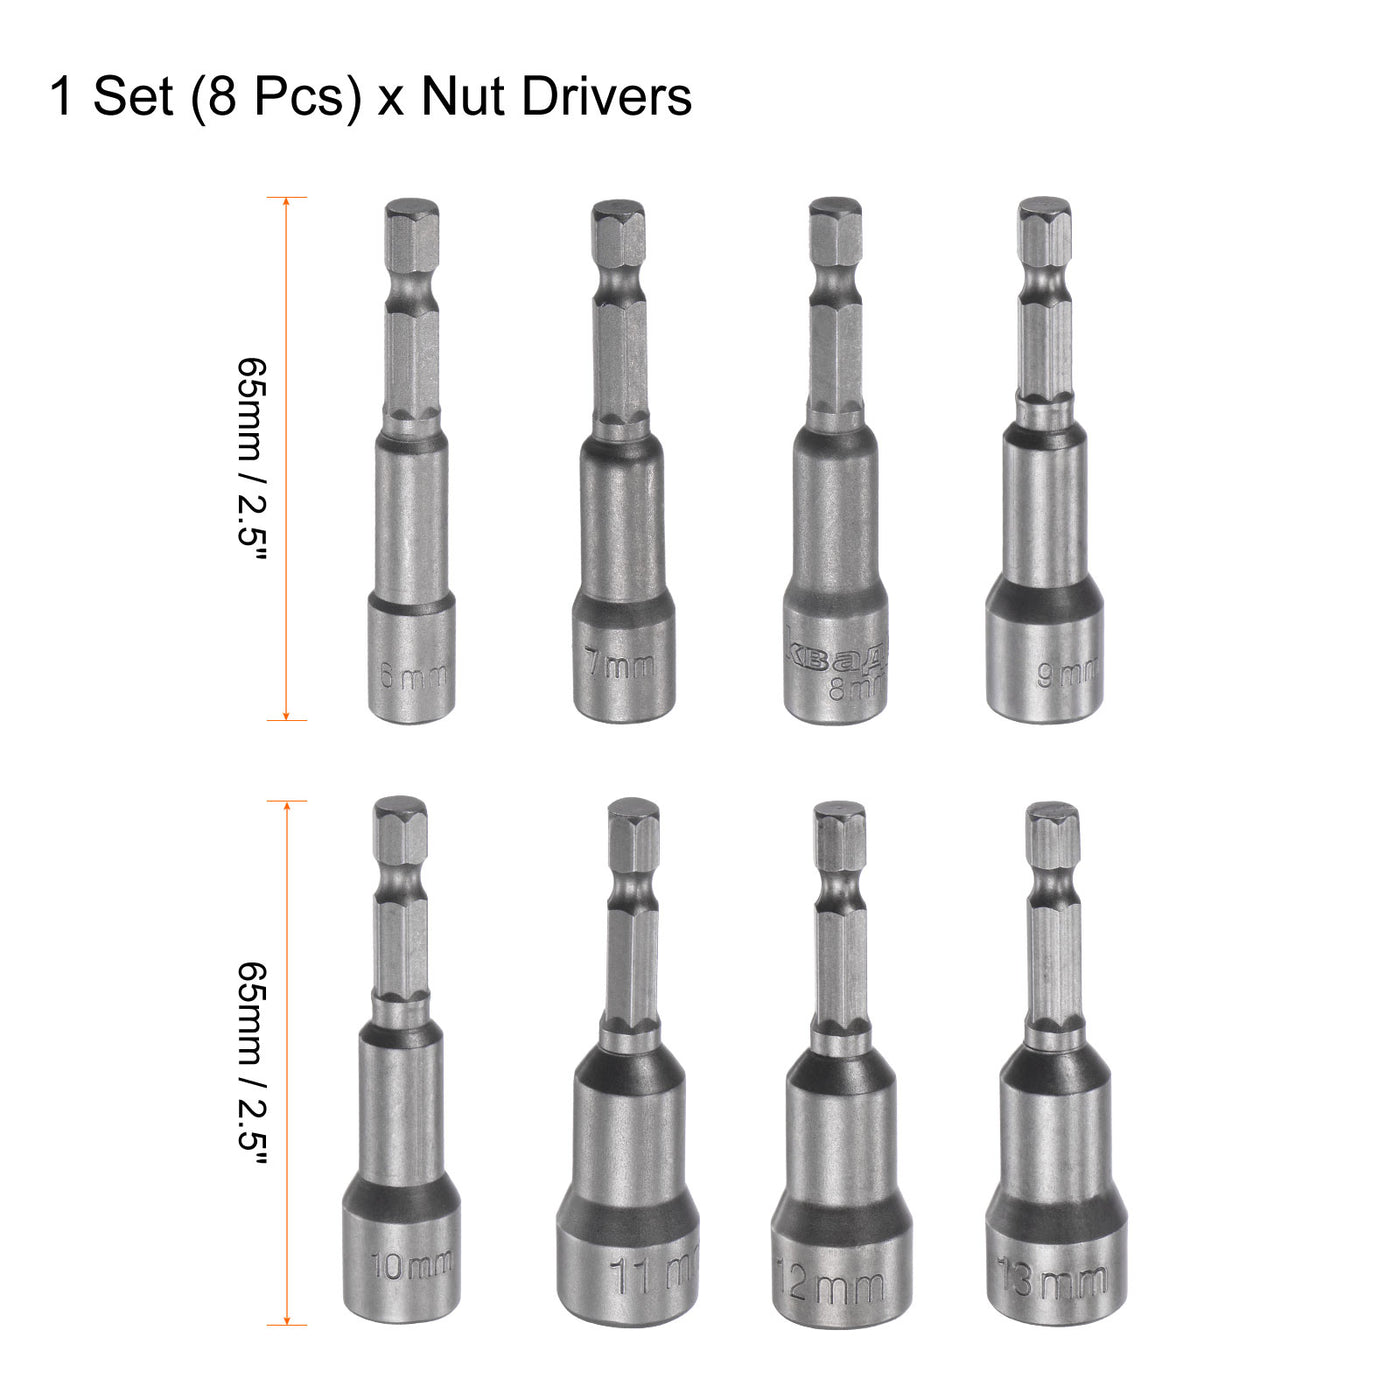 uxcell Uxcell 1/4" Quick-Change Hex Shank 6-13mm Magnetic Nut Driver Bit Set of 8 Piece, CR-V